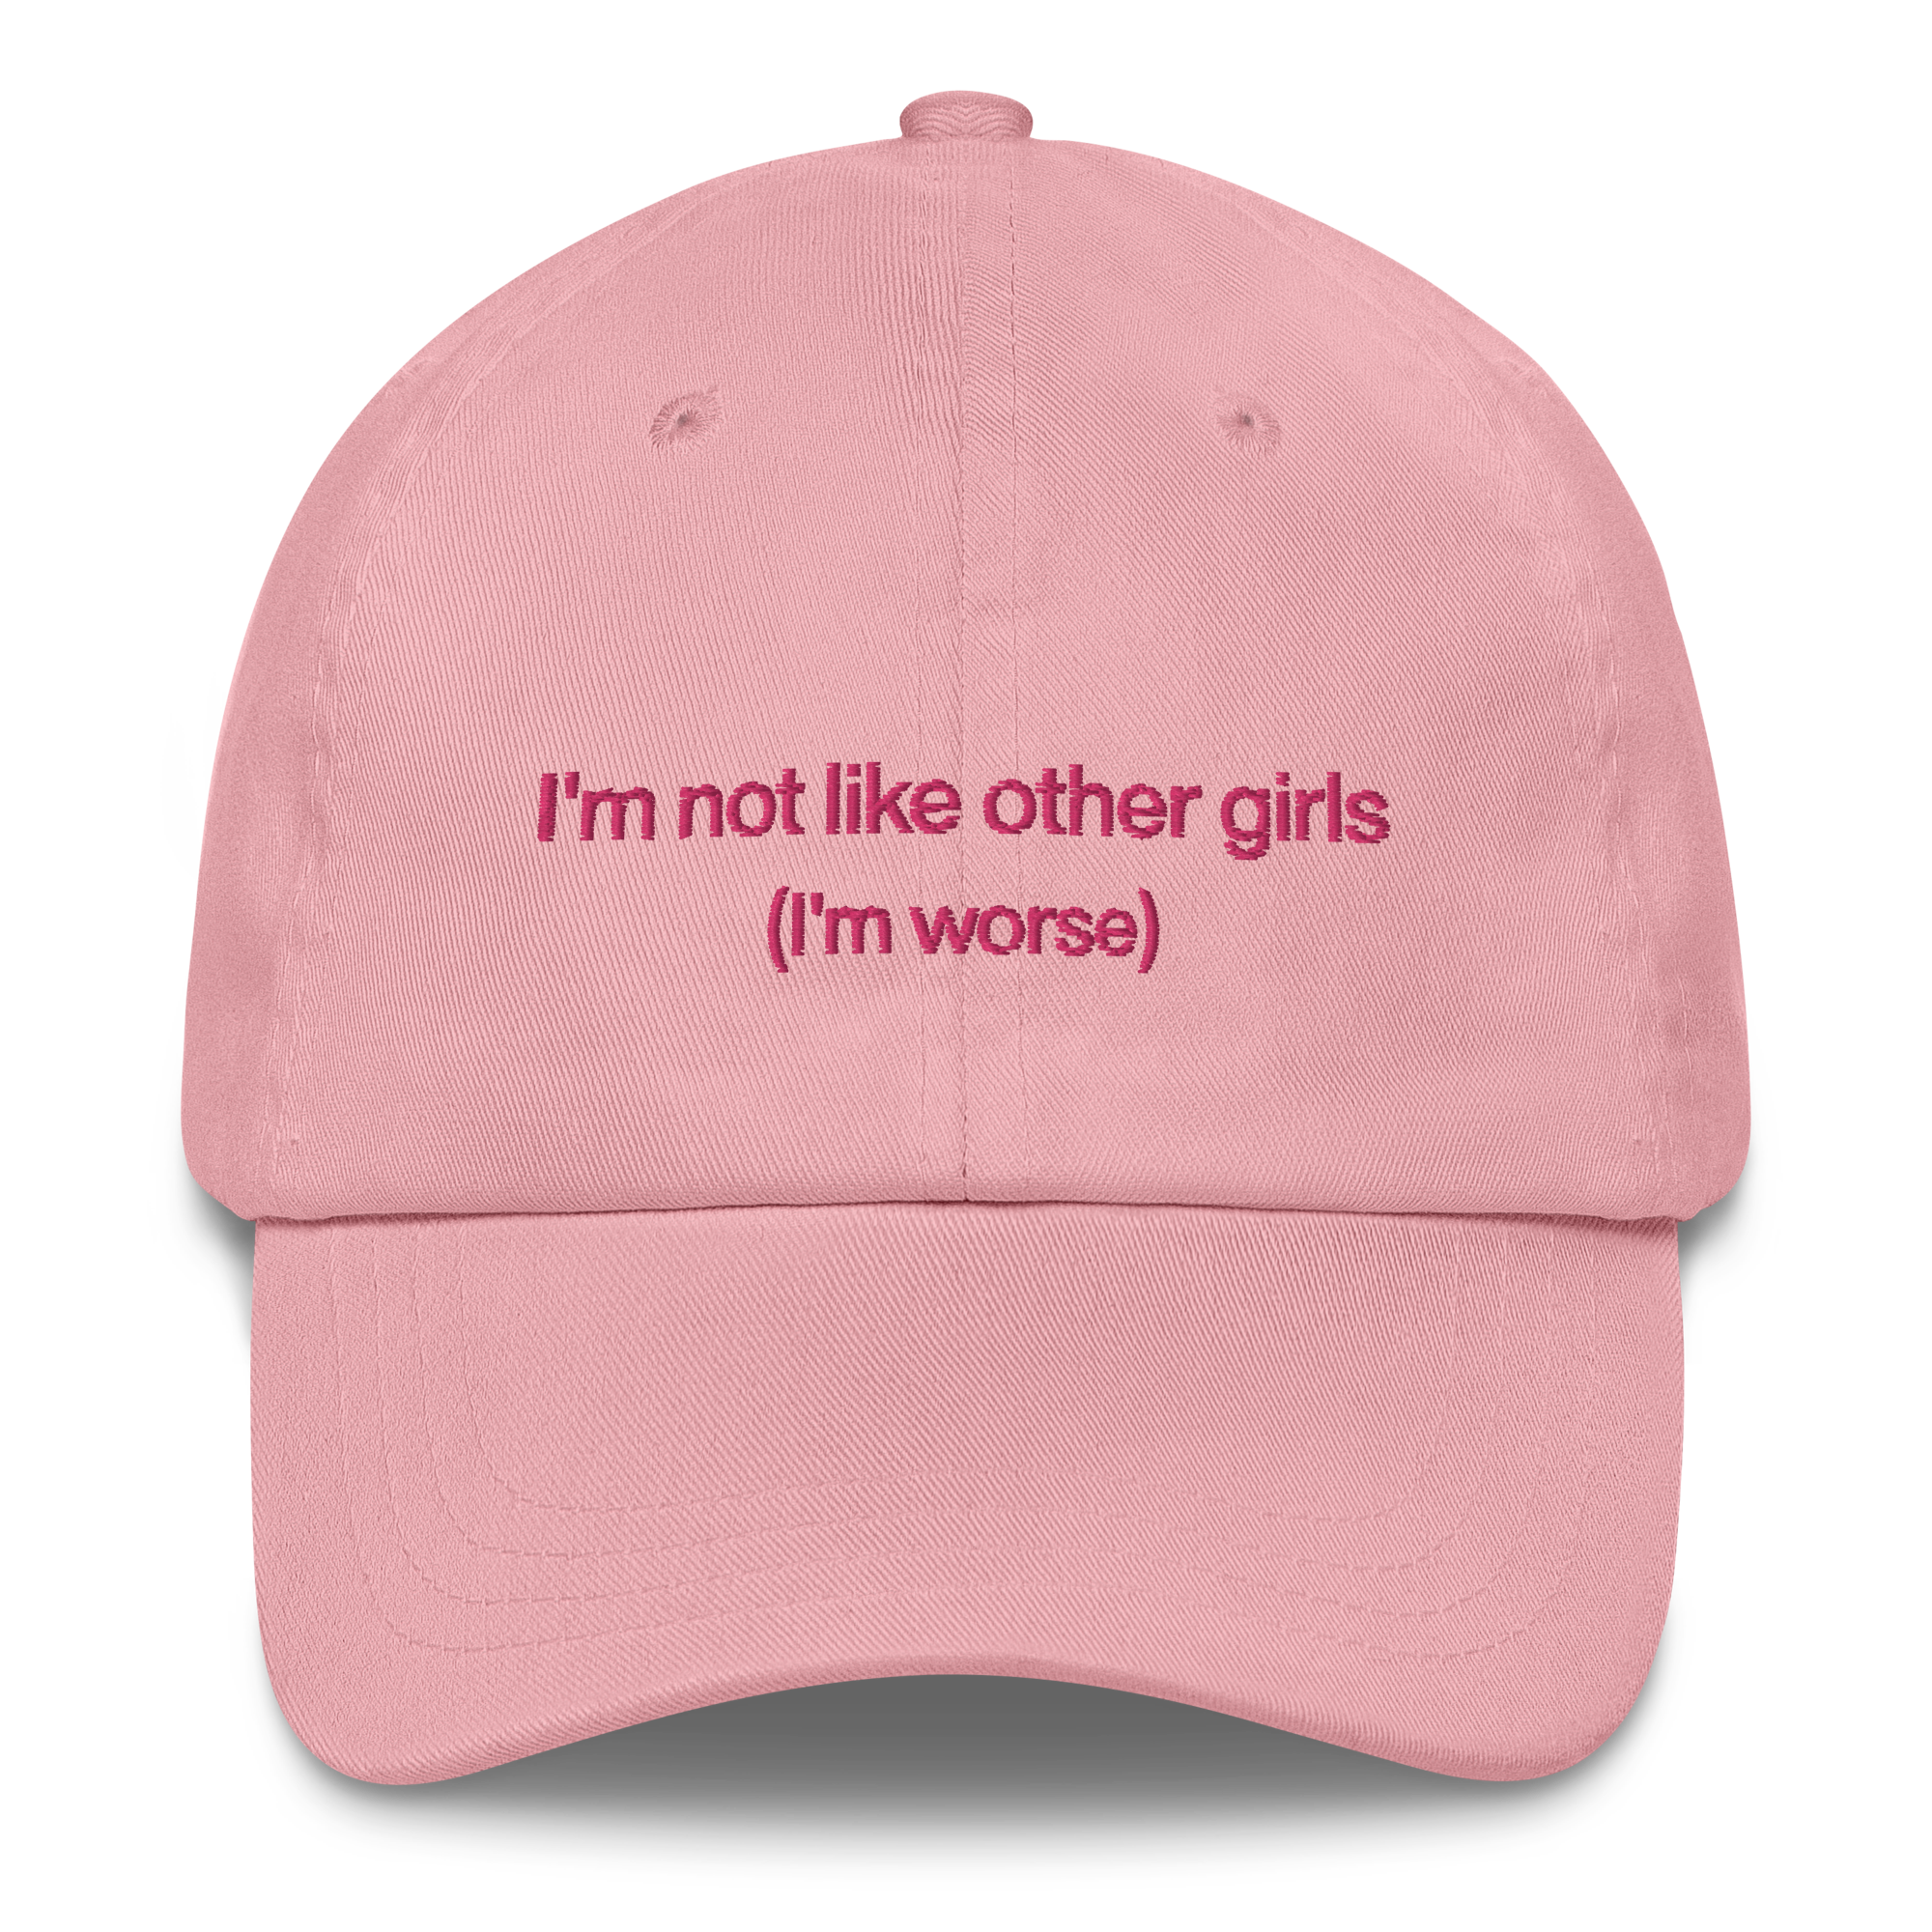 classic-dad-hat-pink-front-667b1f52891bf.png